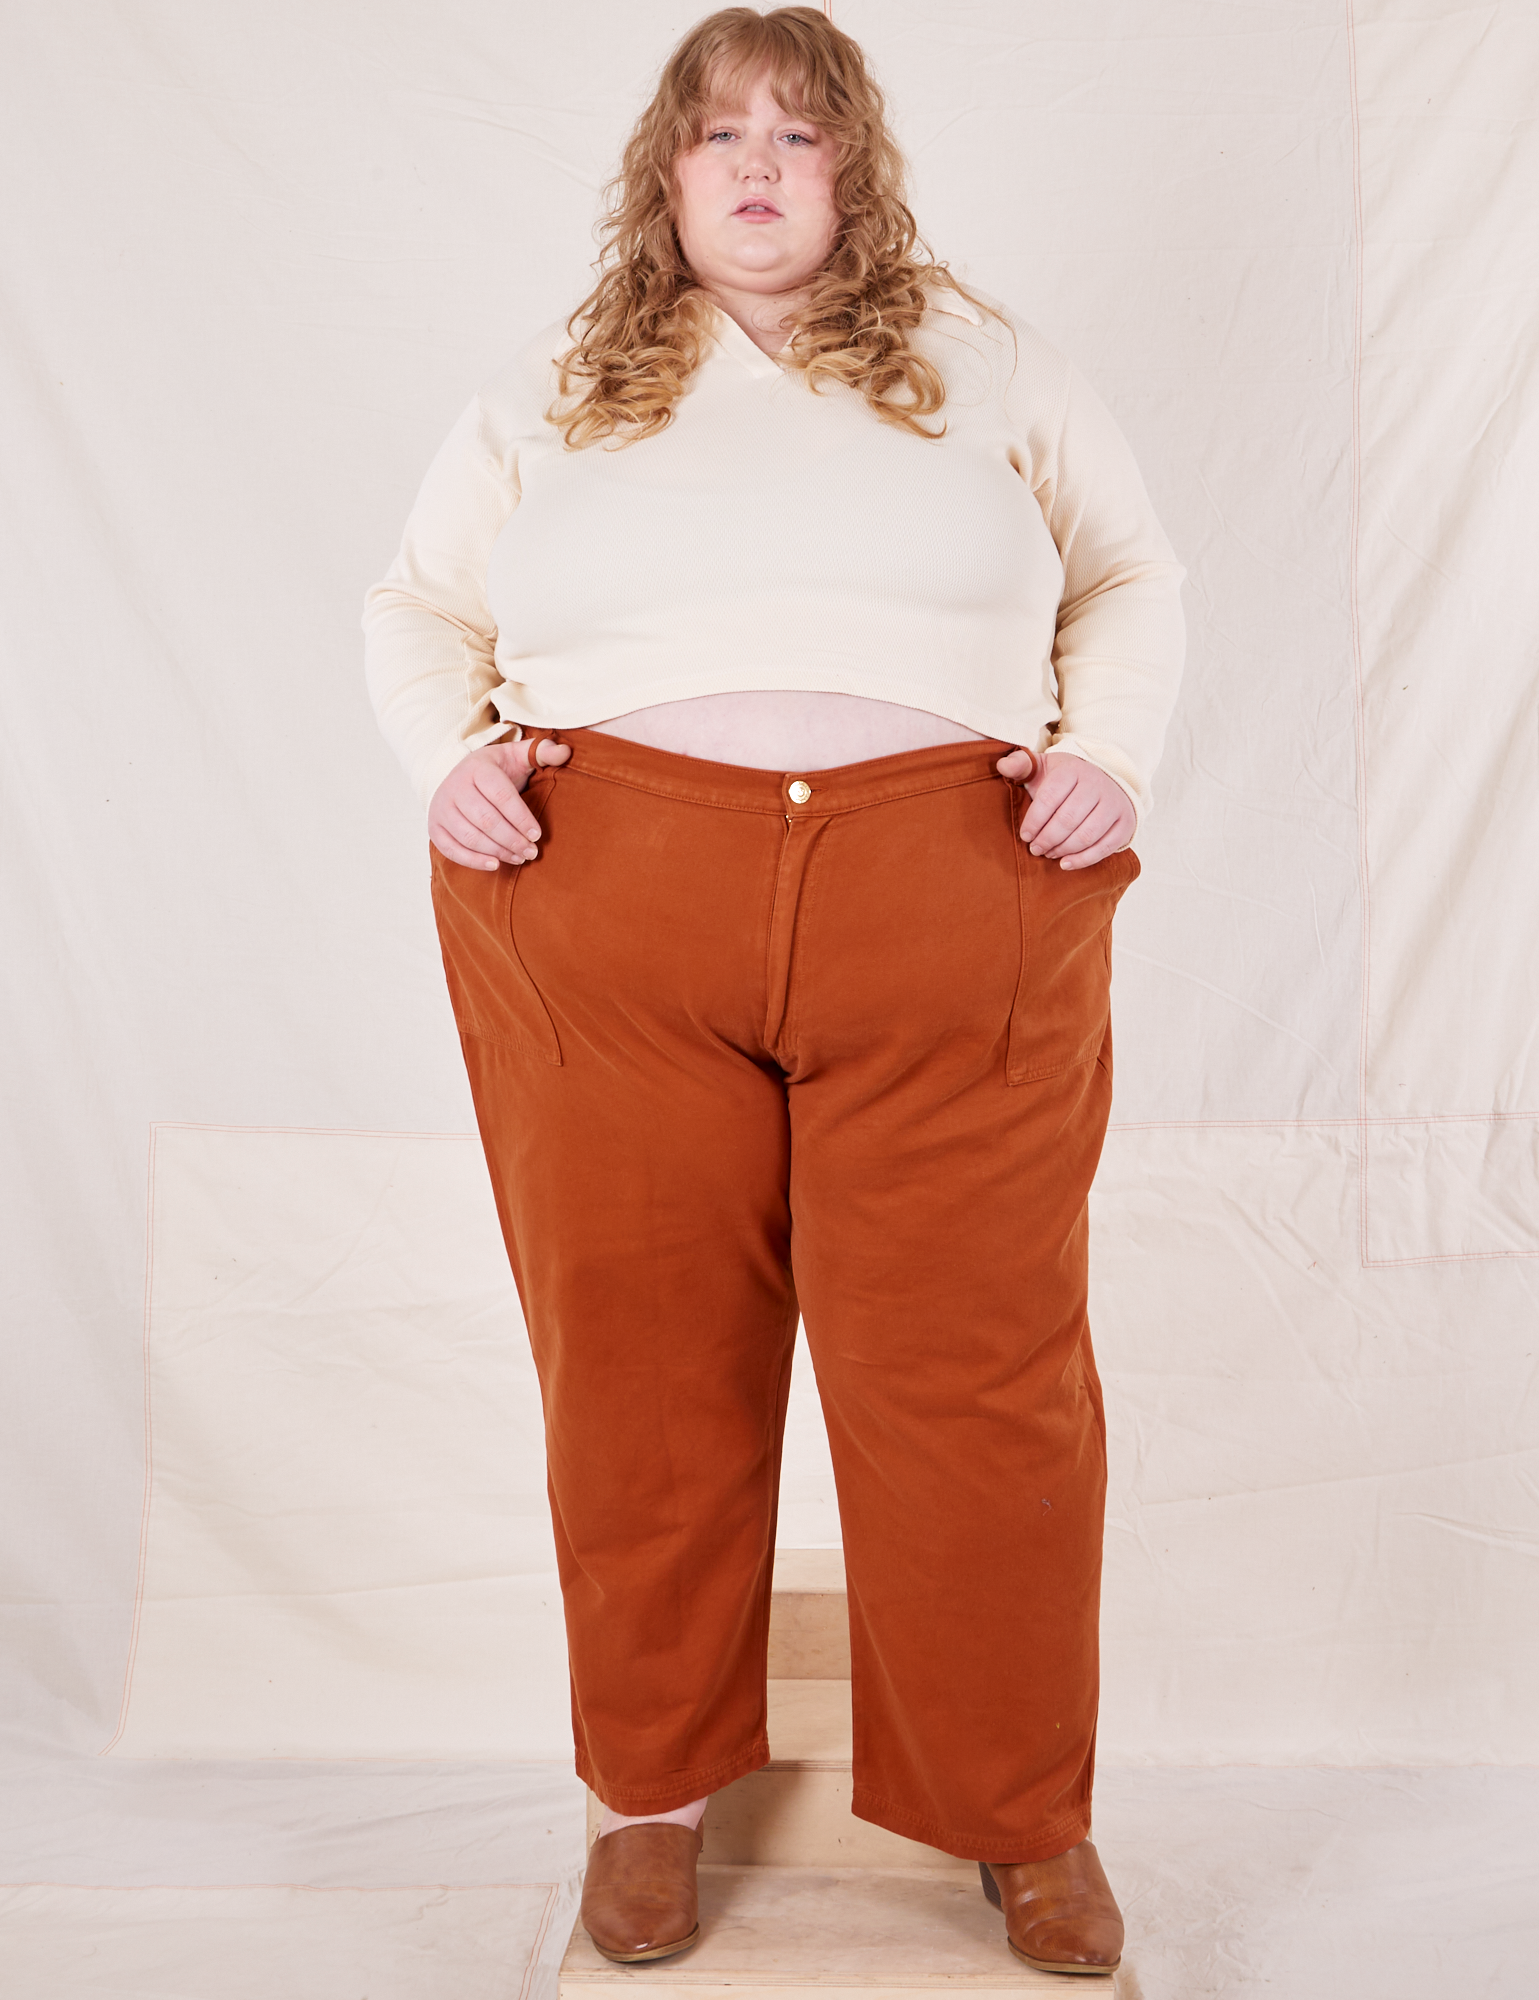 Catie is 5&#39;11&quot; and wearing 5XL Organic Work Pants in Burnt Terracotta paired with vintage off-white Long Sleeve Fisherman Polo